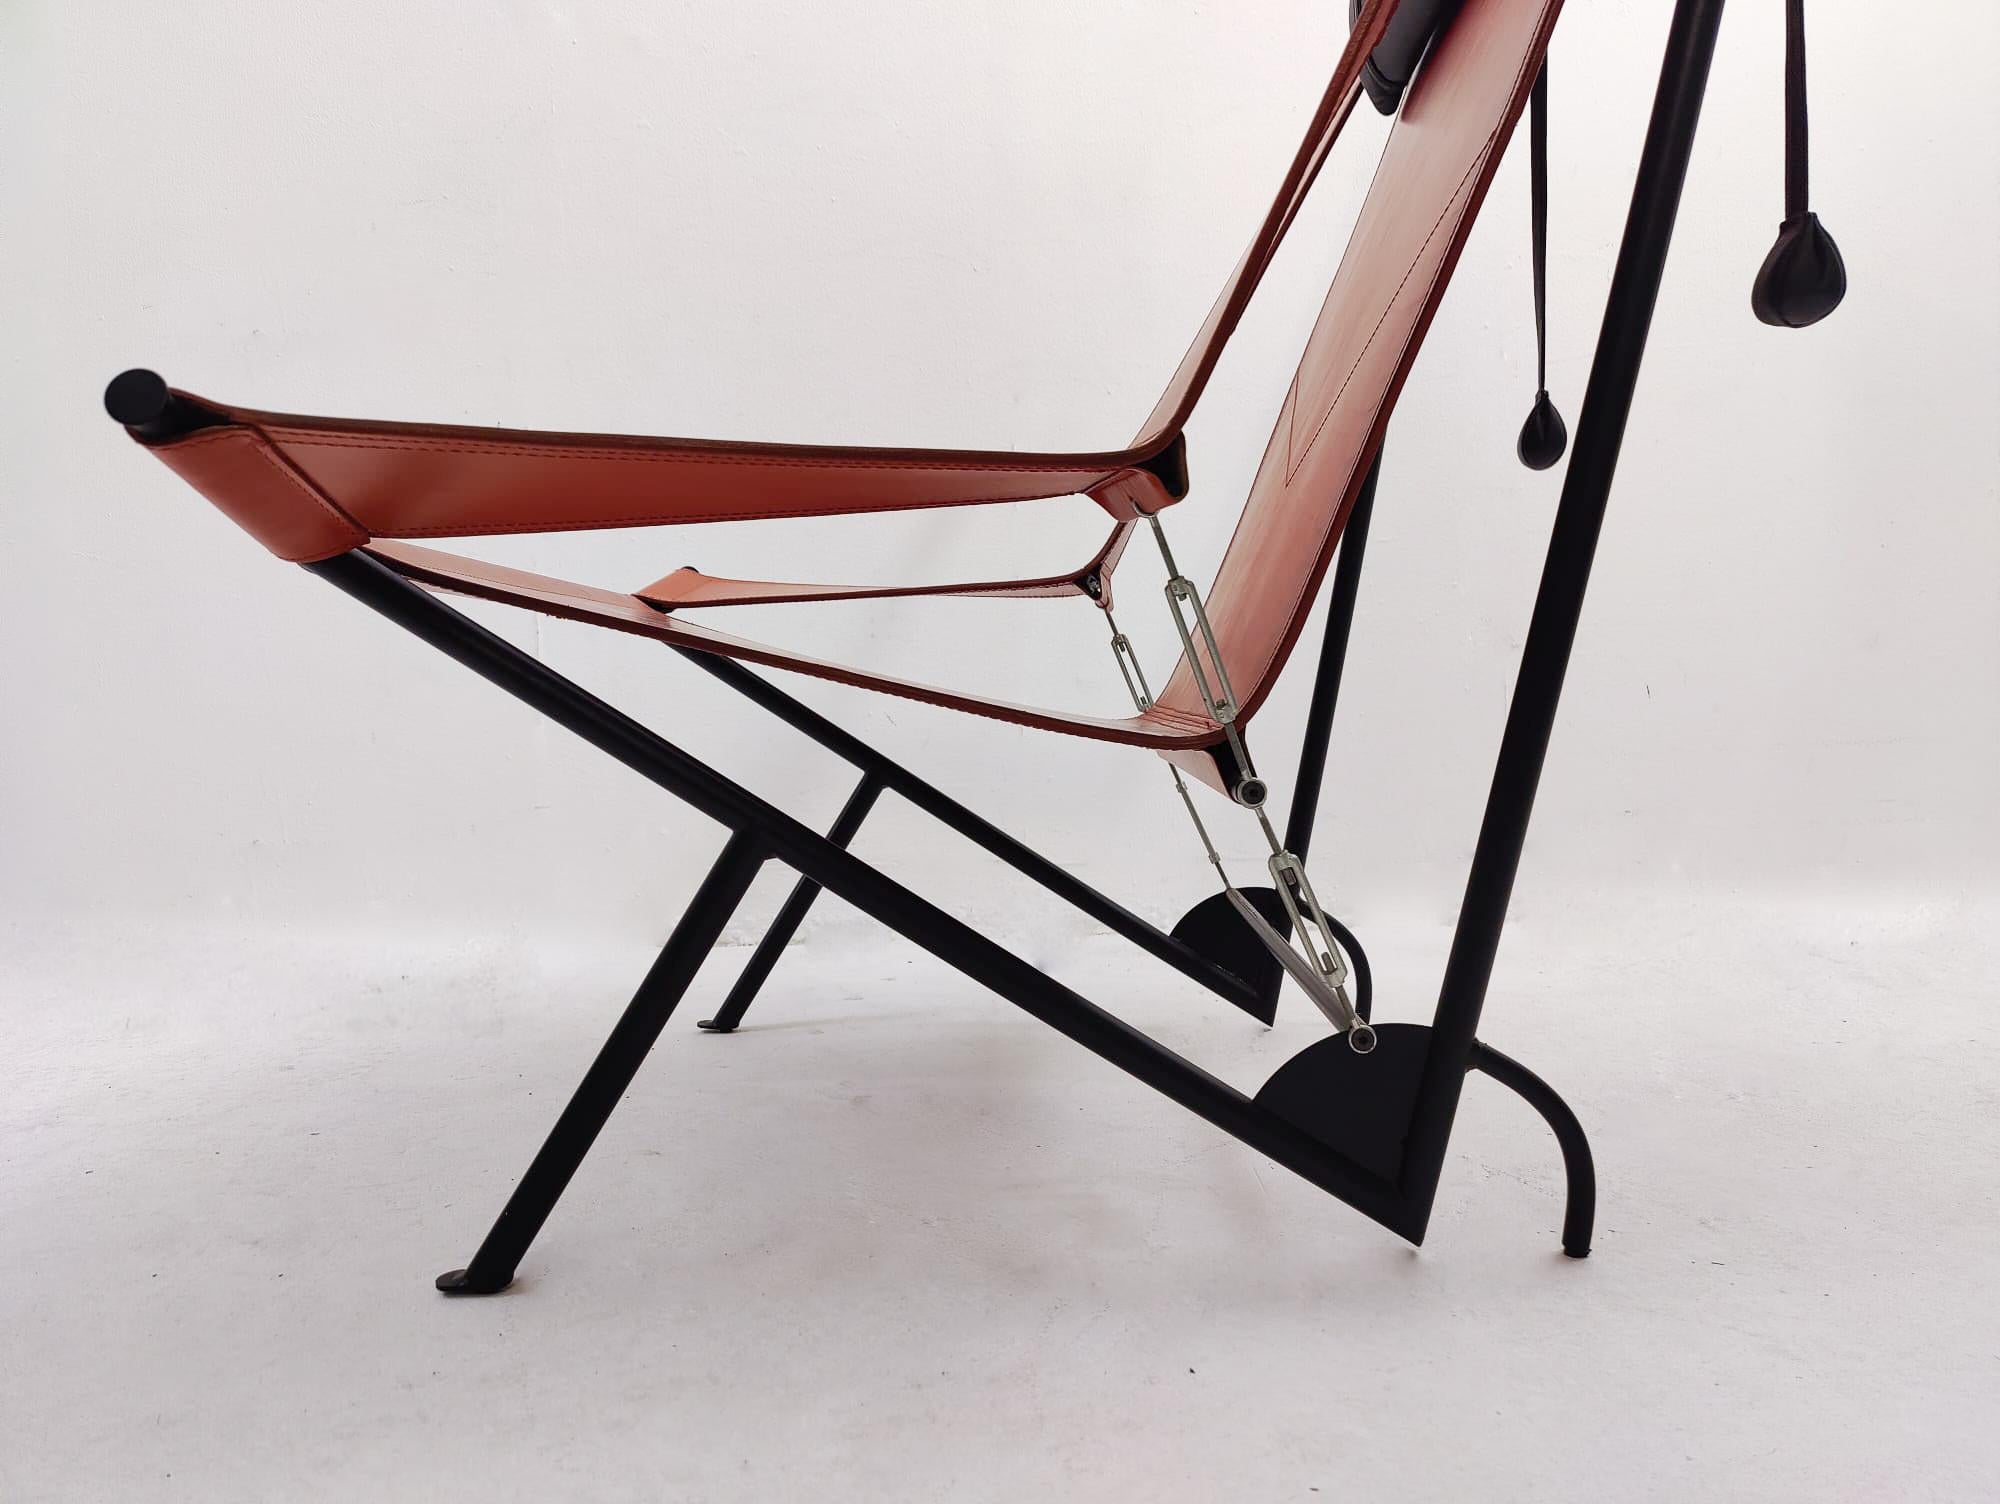 Deltaplano armchair by Carli/Corona for Fasem, Metal and Leather, Italy, 1980s.